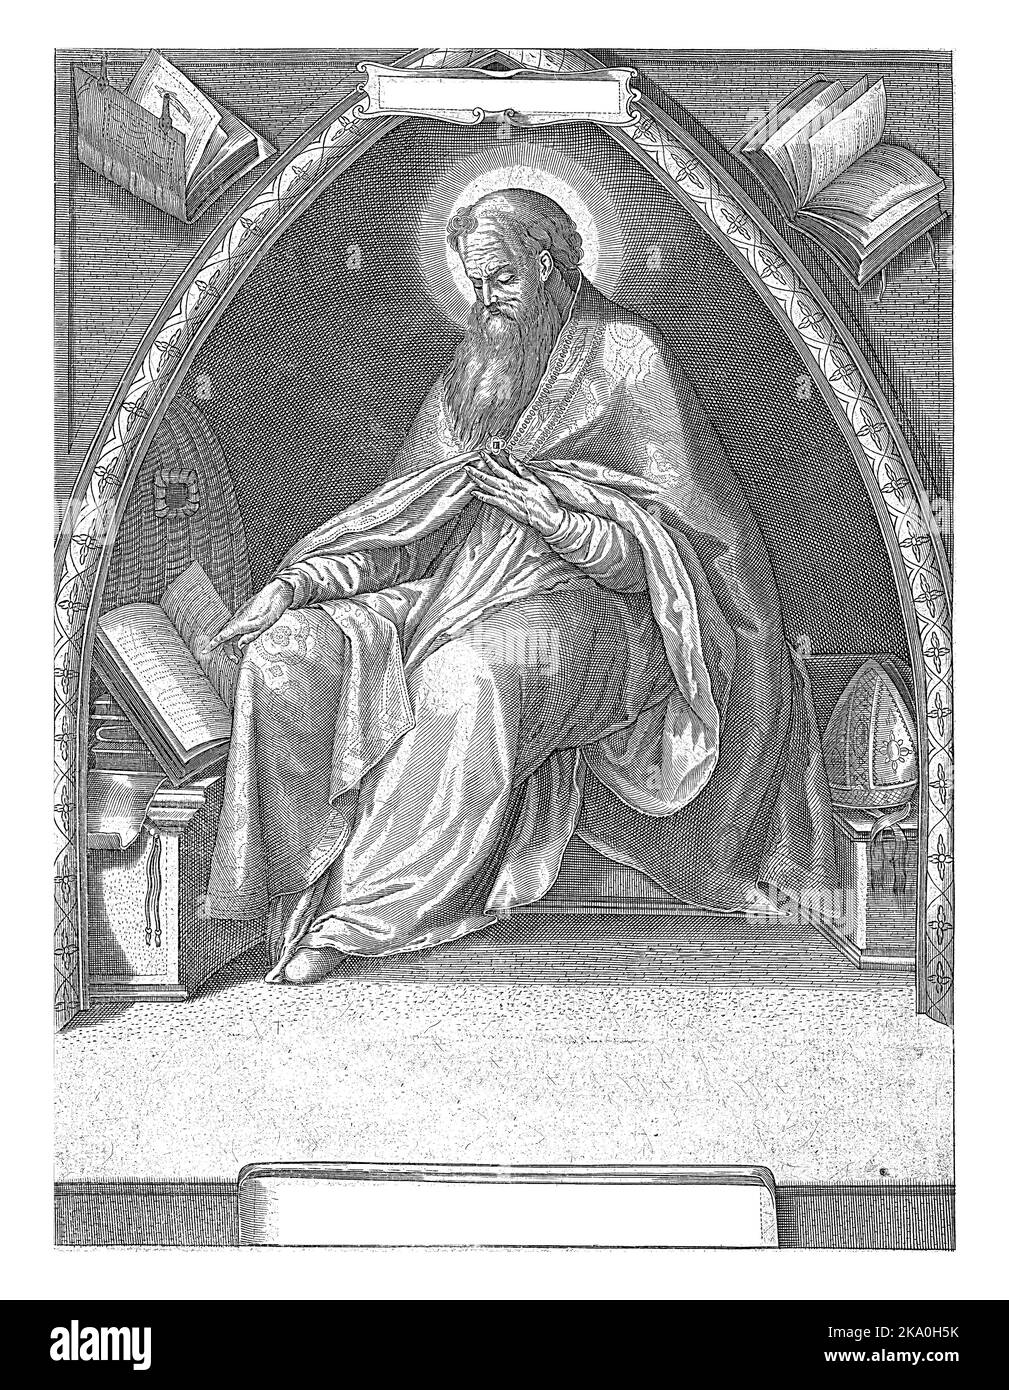 St. Ambrose, Church Father and Bishop of Milan seated in a church vault. He wears the bishop's mantle and his miter lies next to him on a bench. Hey l Stock Photo